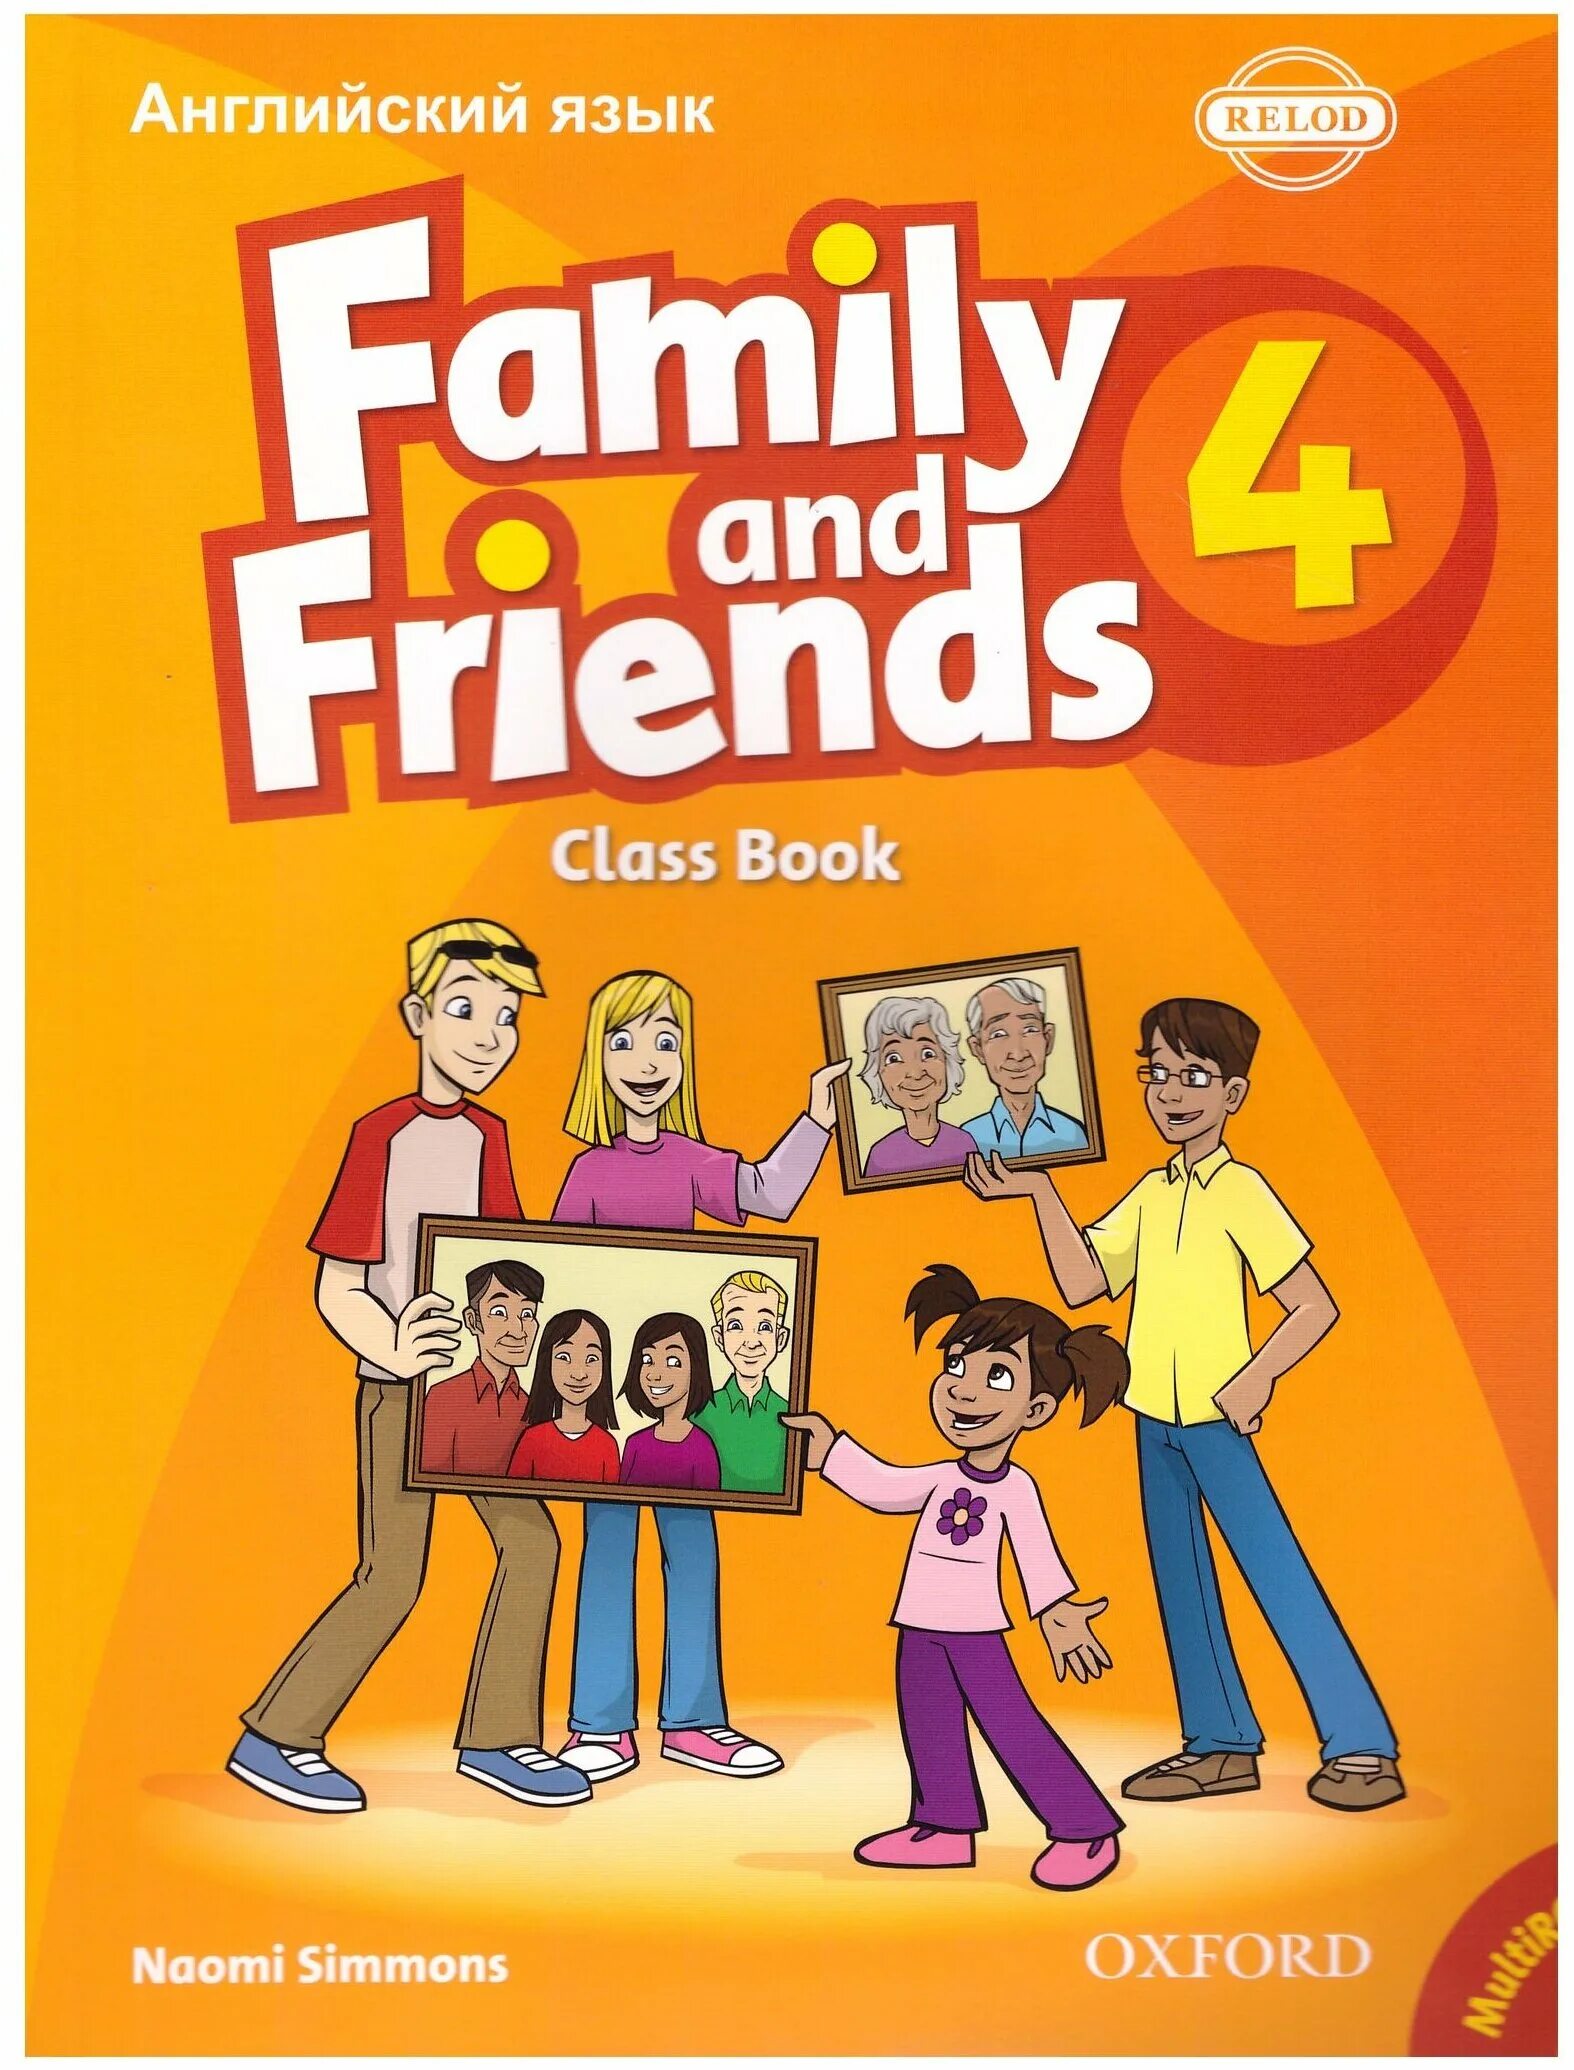 Family and friends students book. 4 Класс Family and friends 2 Classbook Workbook. Учебник по английскому языку Family and friends 4. Английский язык Family and friends class book 2. Учебник по английскому языку Family and friends 1.